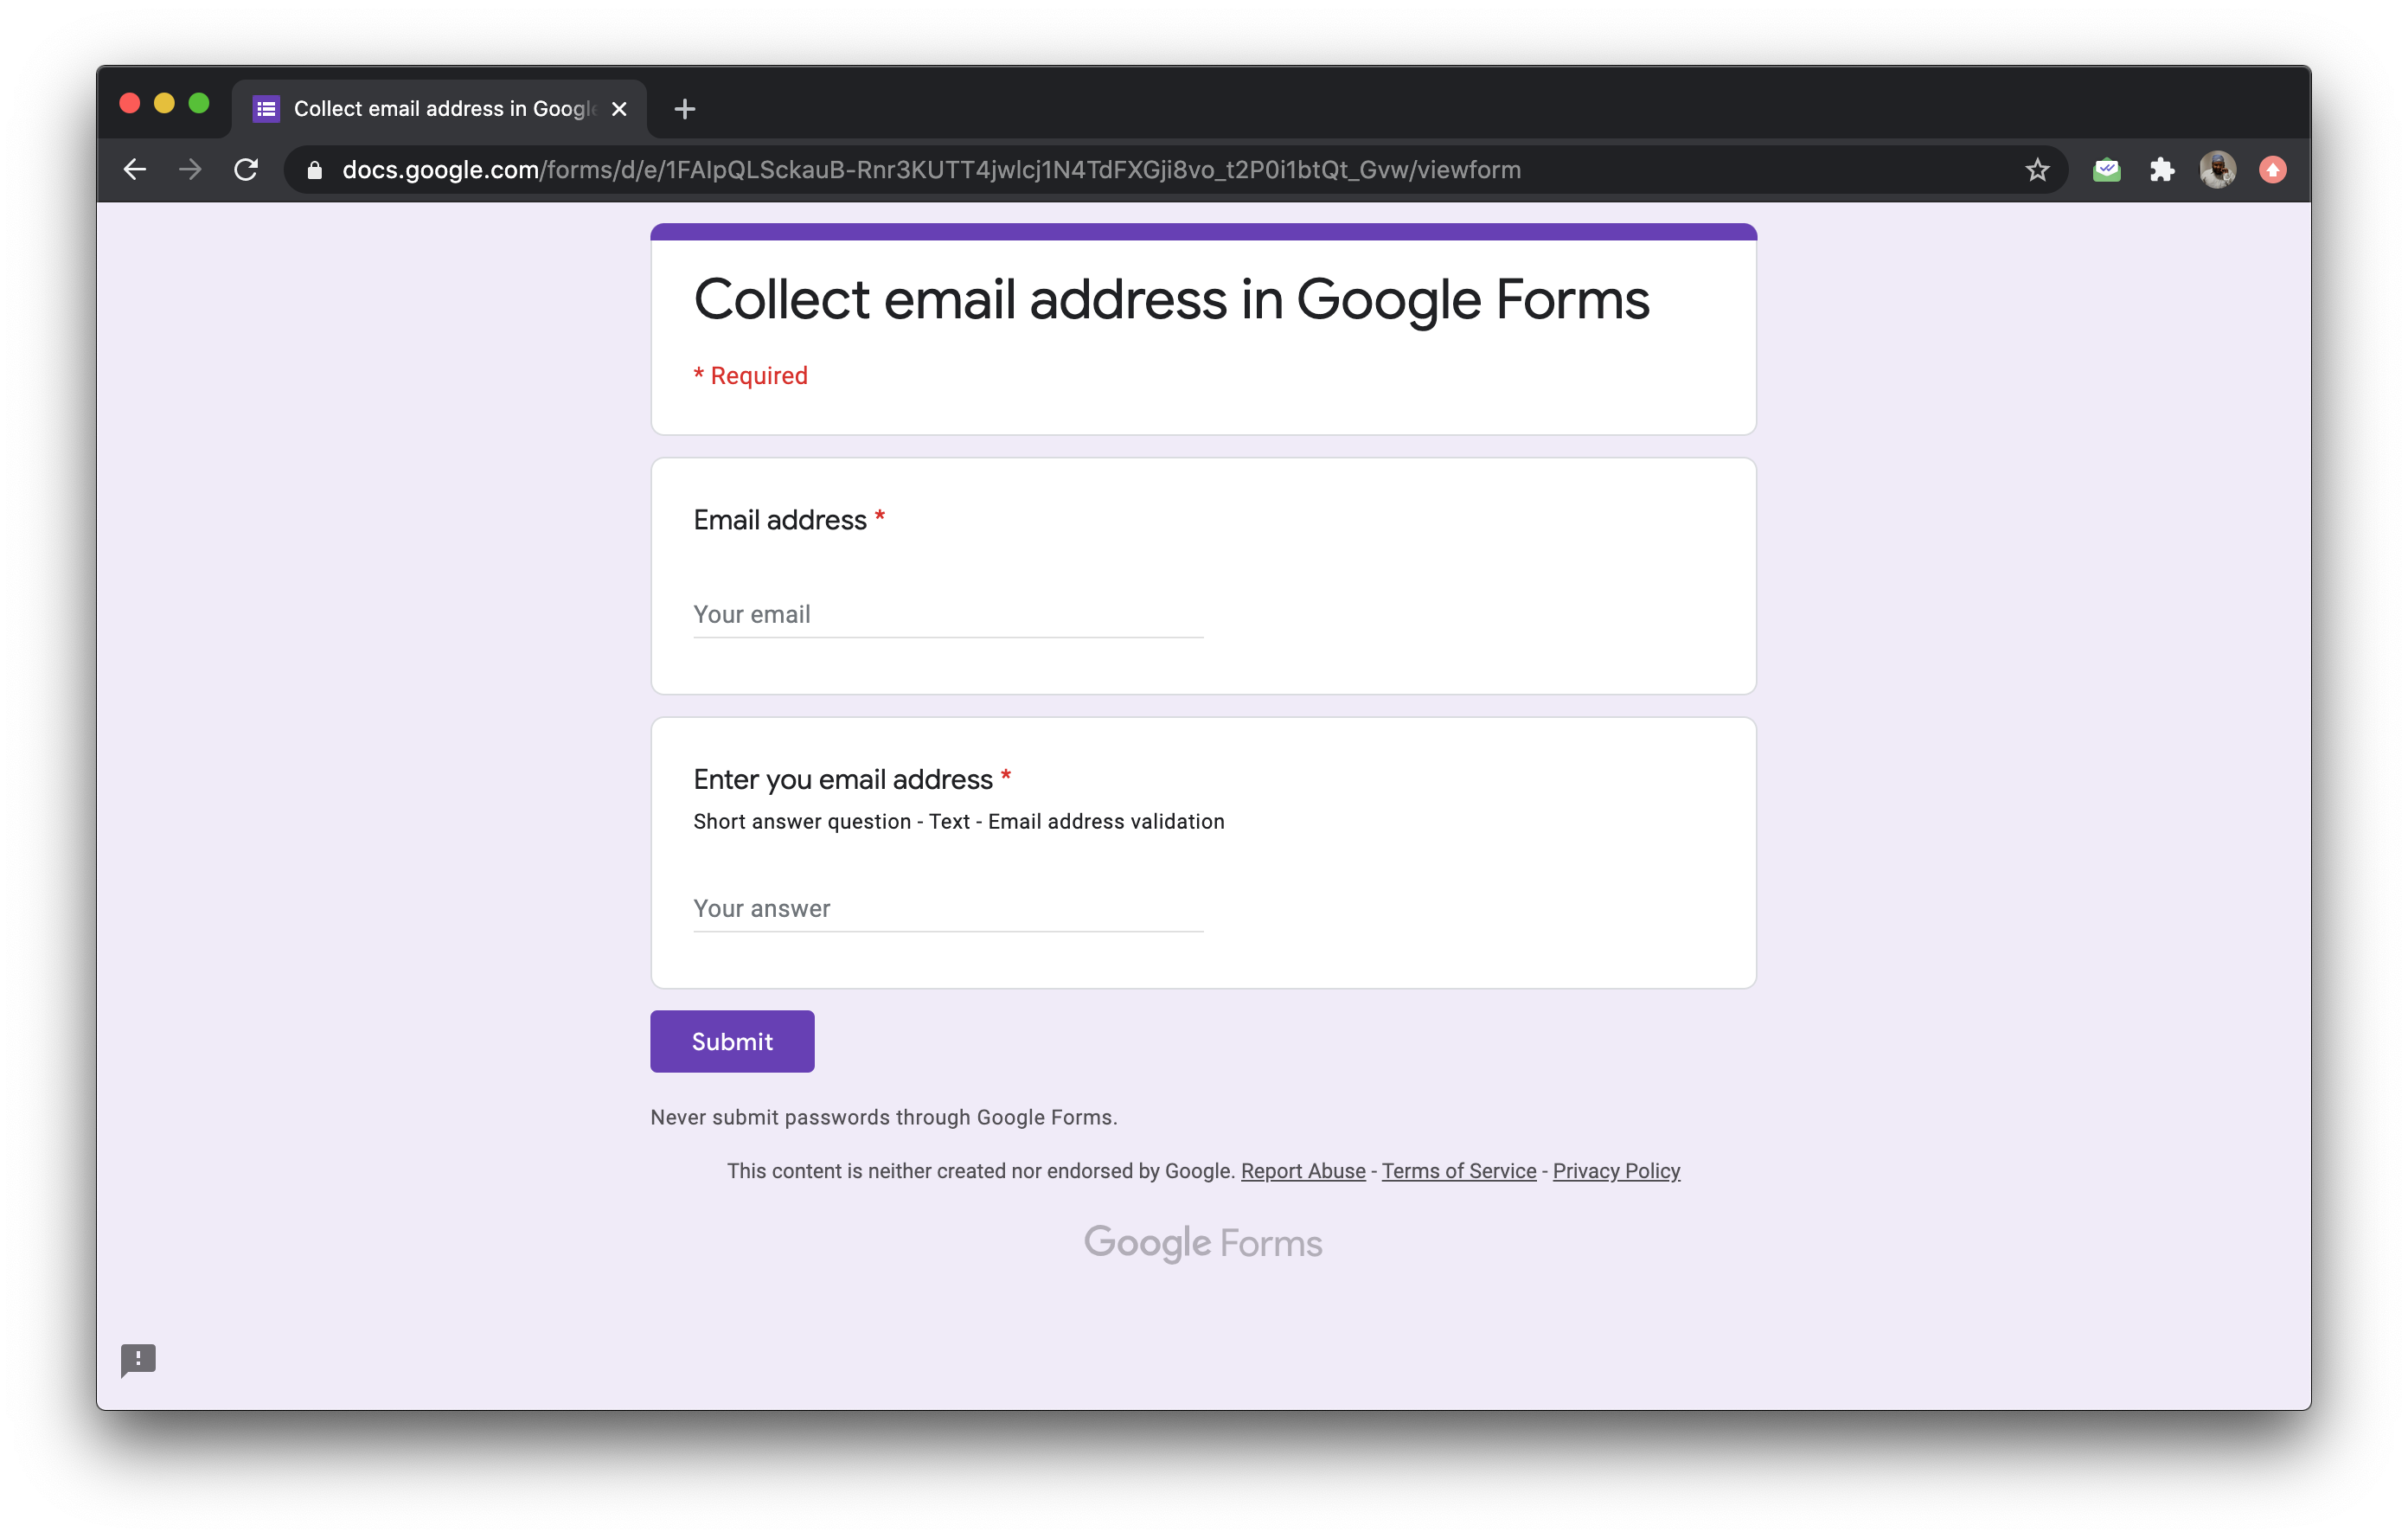 There are two ways to collect email address in Google Forms. You can enable the "Collect email addresses" option in the Settings or add a short answer question with email address response validation. 